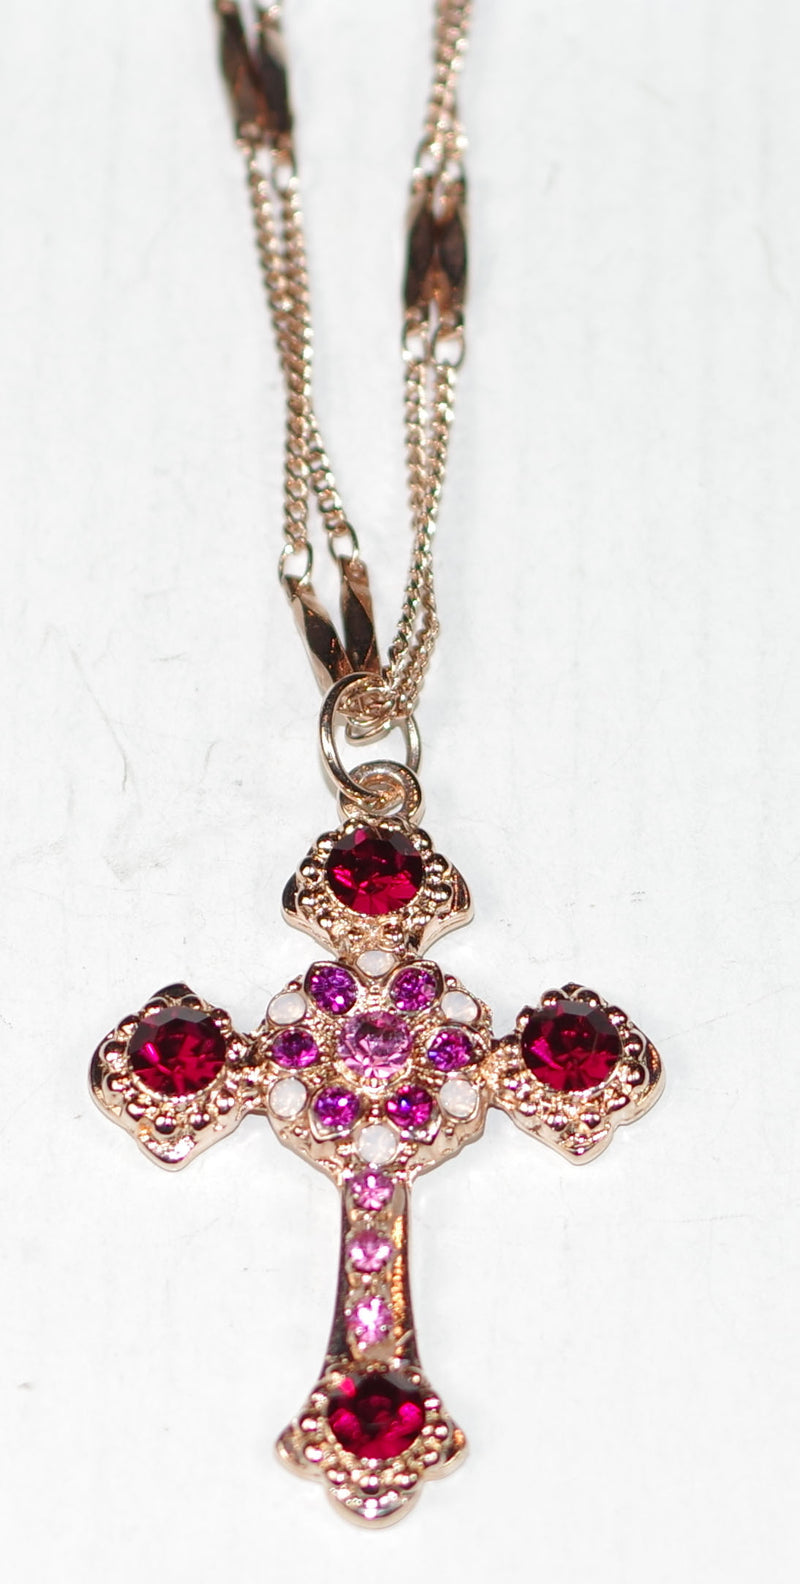 MARIANA CROSS PENDANT ENCHANTED: red, white, pink stones in rose gold setting, 20" adjustable double chain